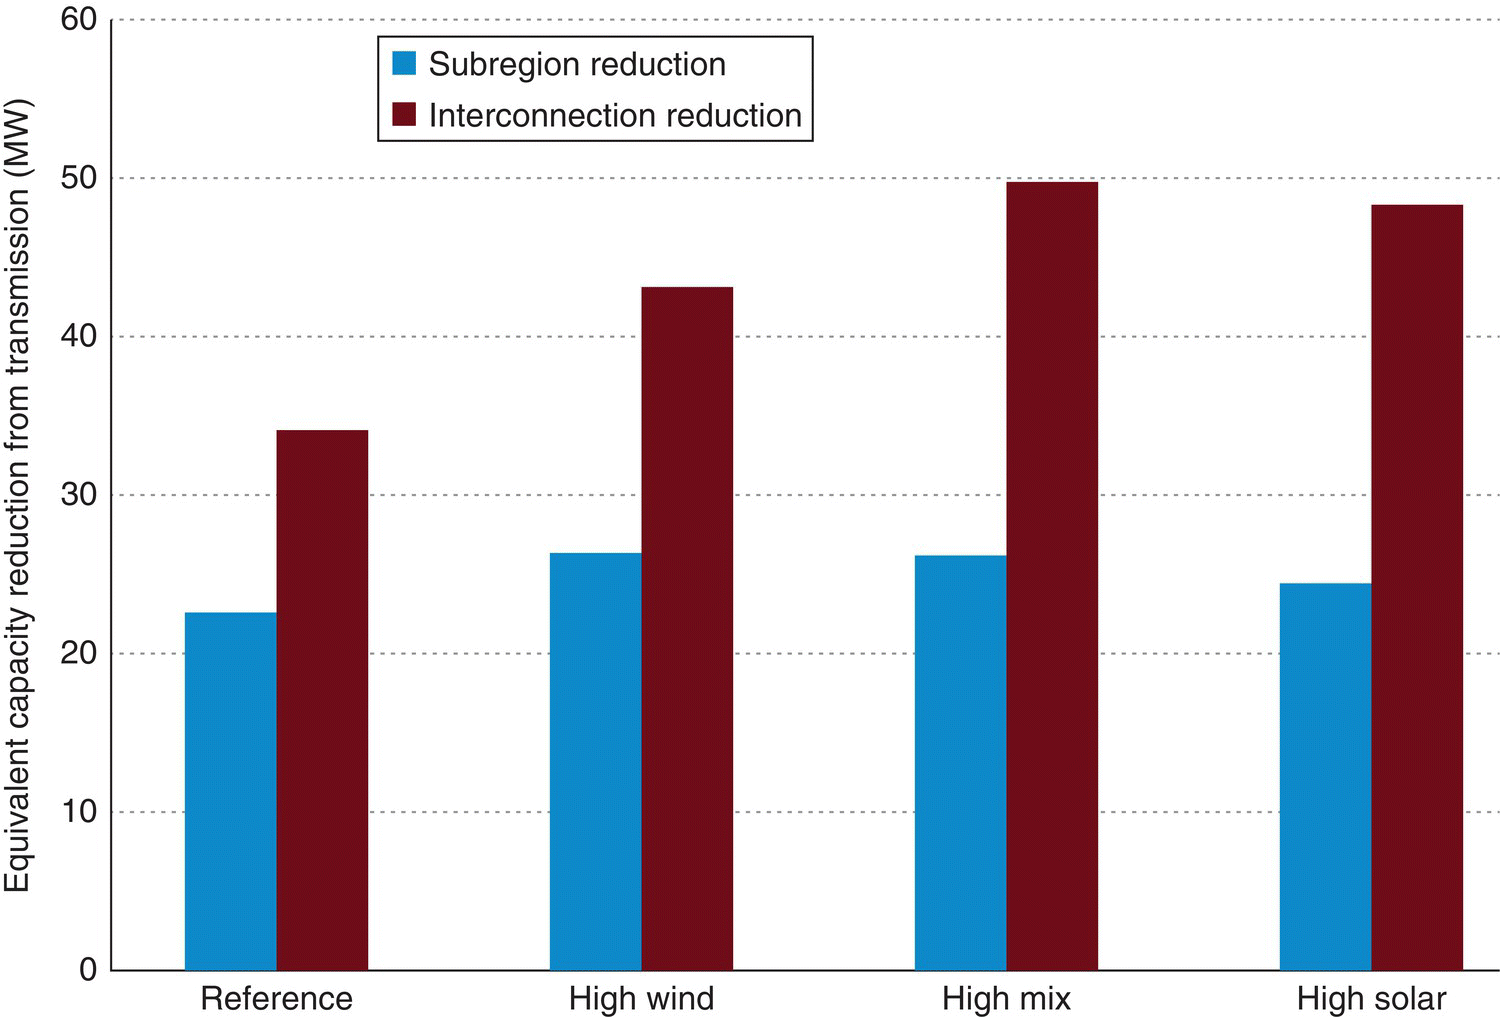 Graph of the impact of interconnection on resource adequacy in US Western Interconnection displaying 4 sets of clustered bars for reference, high wind, etc. Each cluster consists of 2 bars for subregion and interconnection reduction.